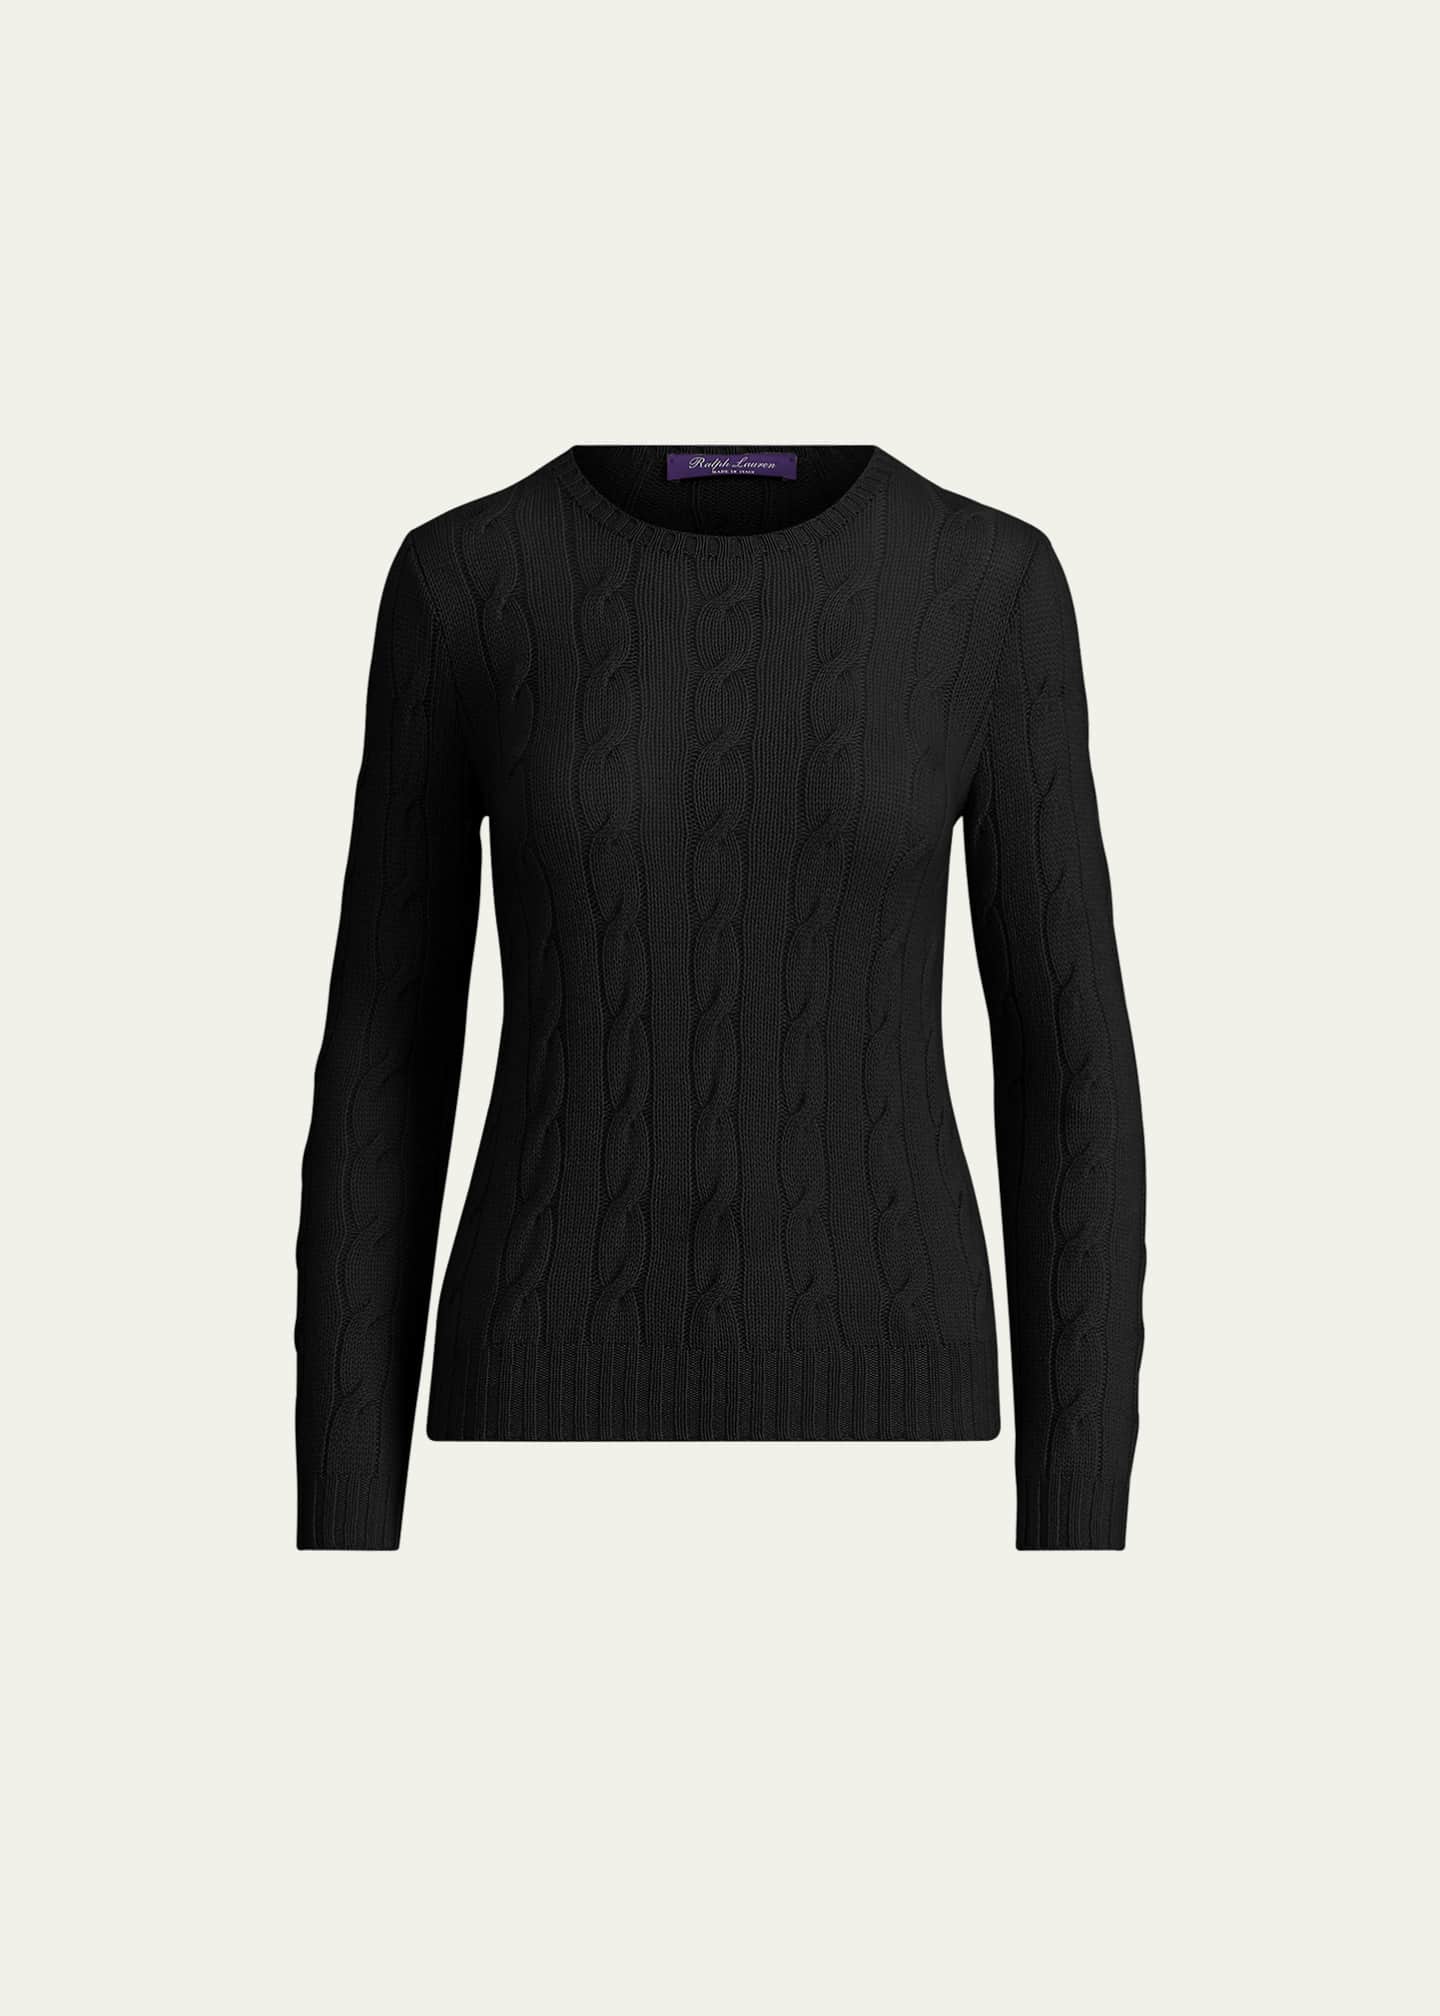 Ralph Lauren Women's Cable-Knit Cashmere Sweater - Size S in Black